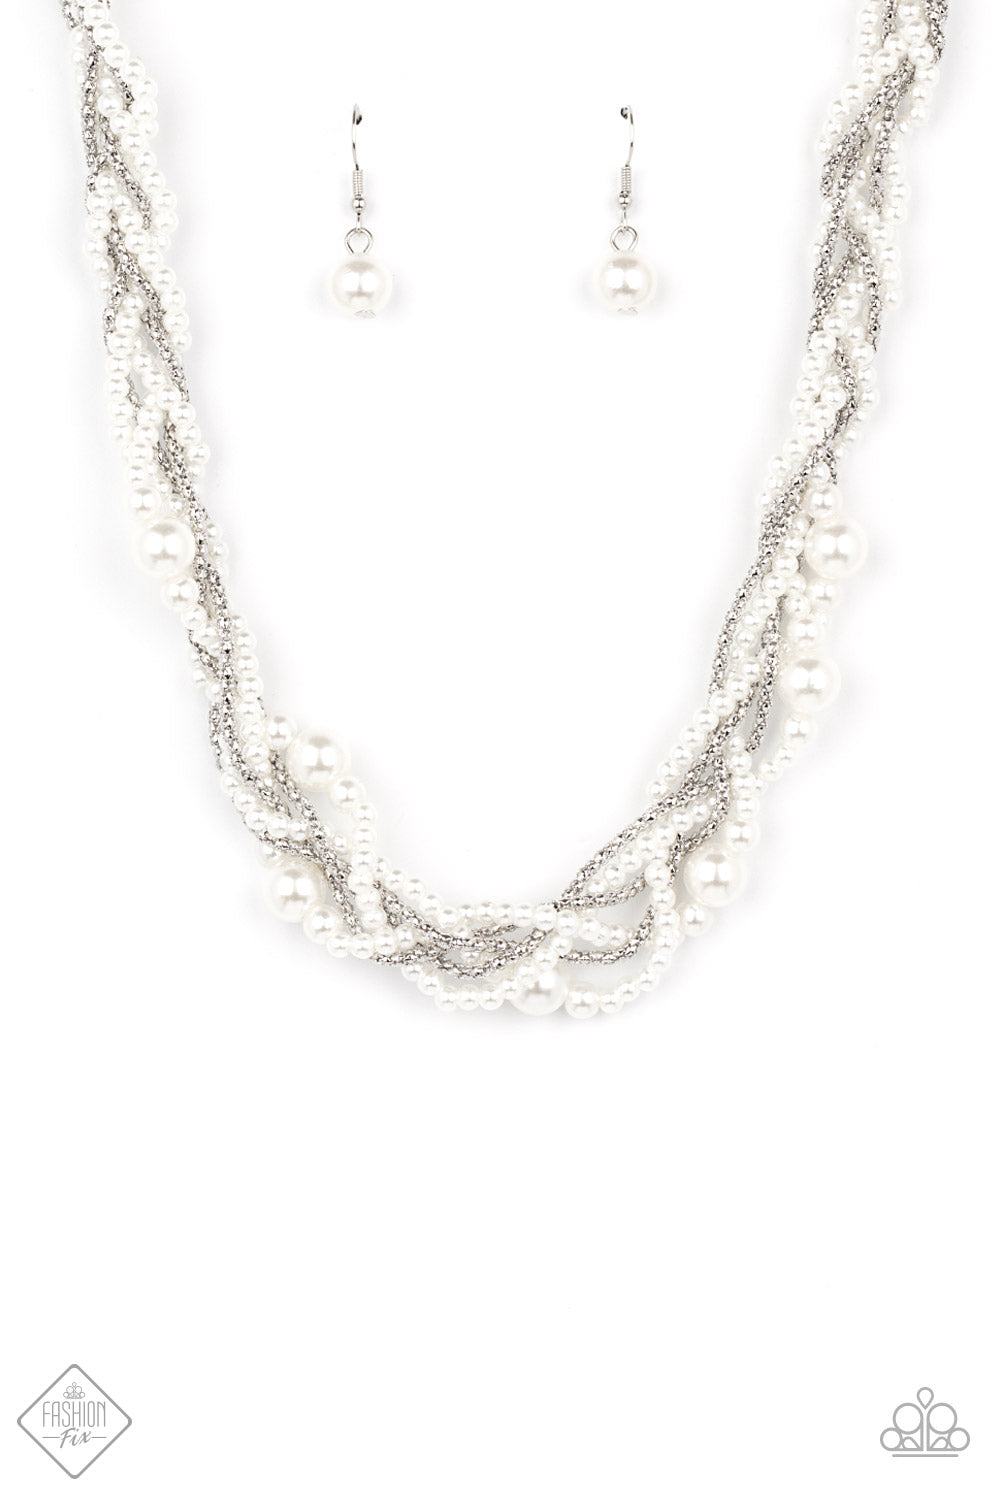 Paparazzi Royal Reminiscence White Short Necklace - Fashion Fix Fiercely 5th Avenue March 2021